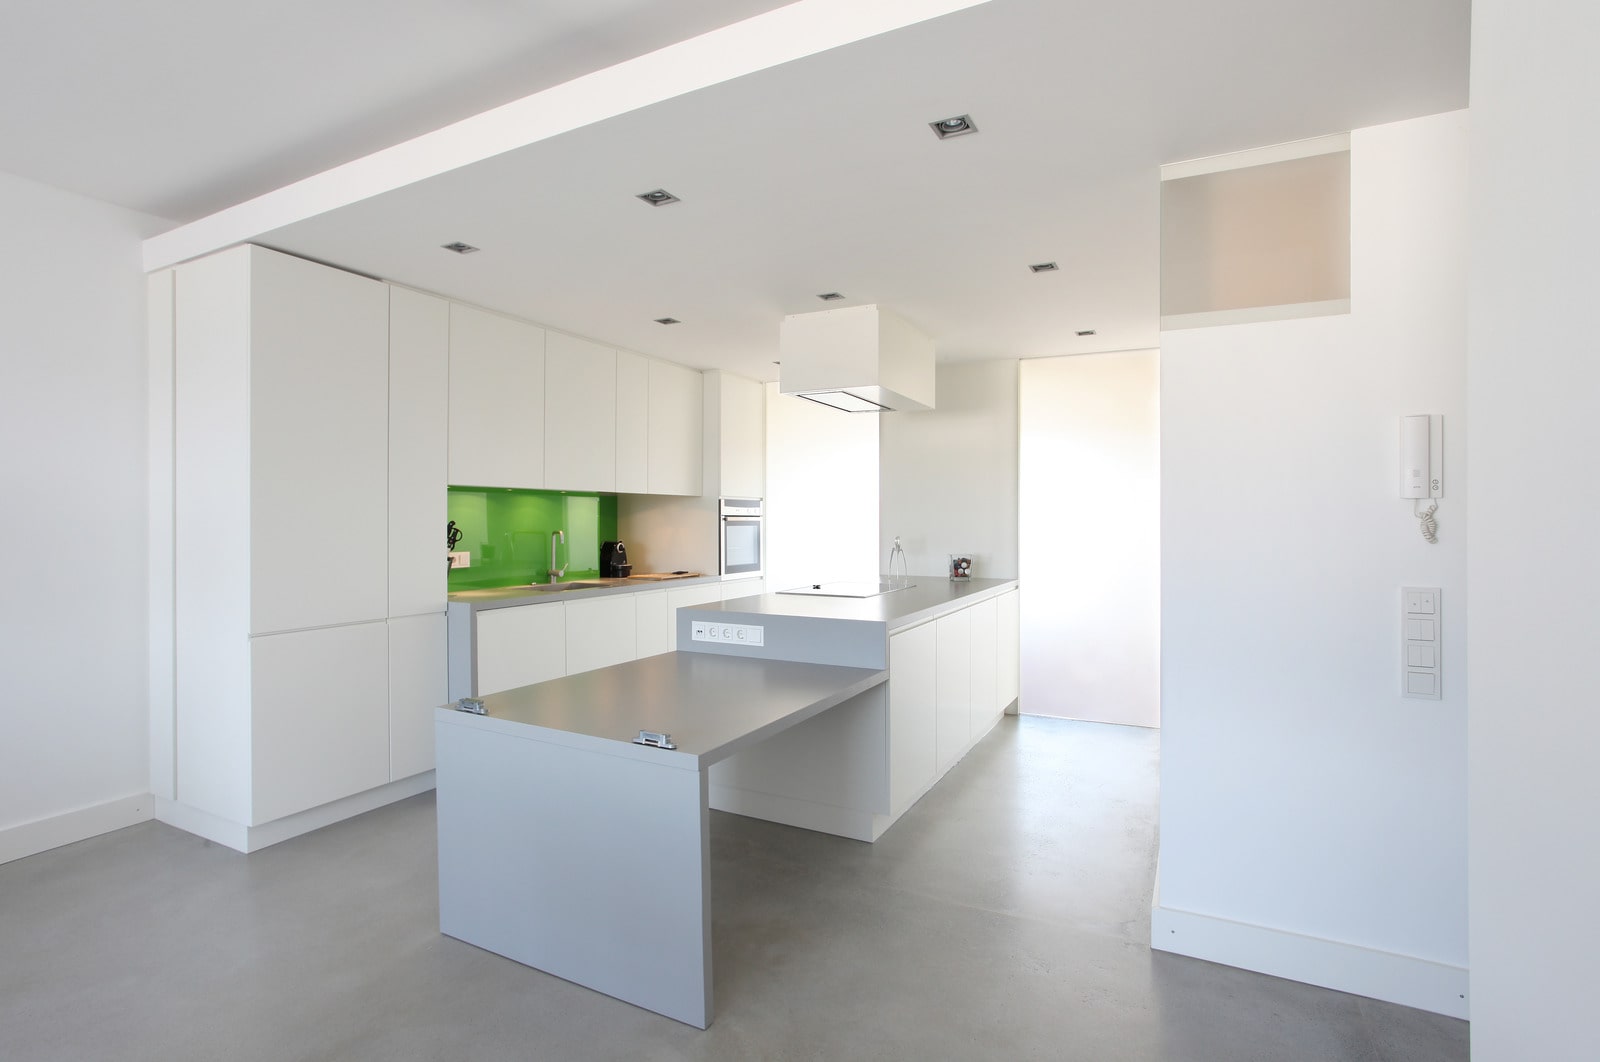 Example of how through custom-designed plasterboard elements, space can change and take on specific functions
